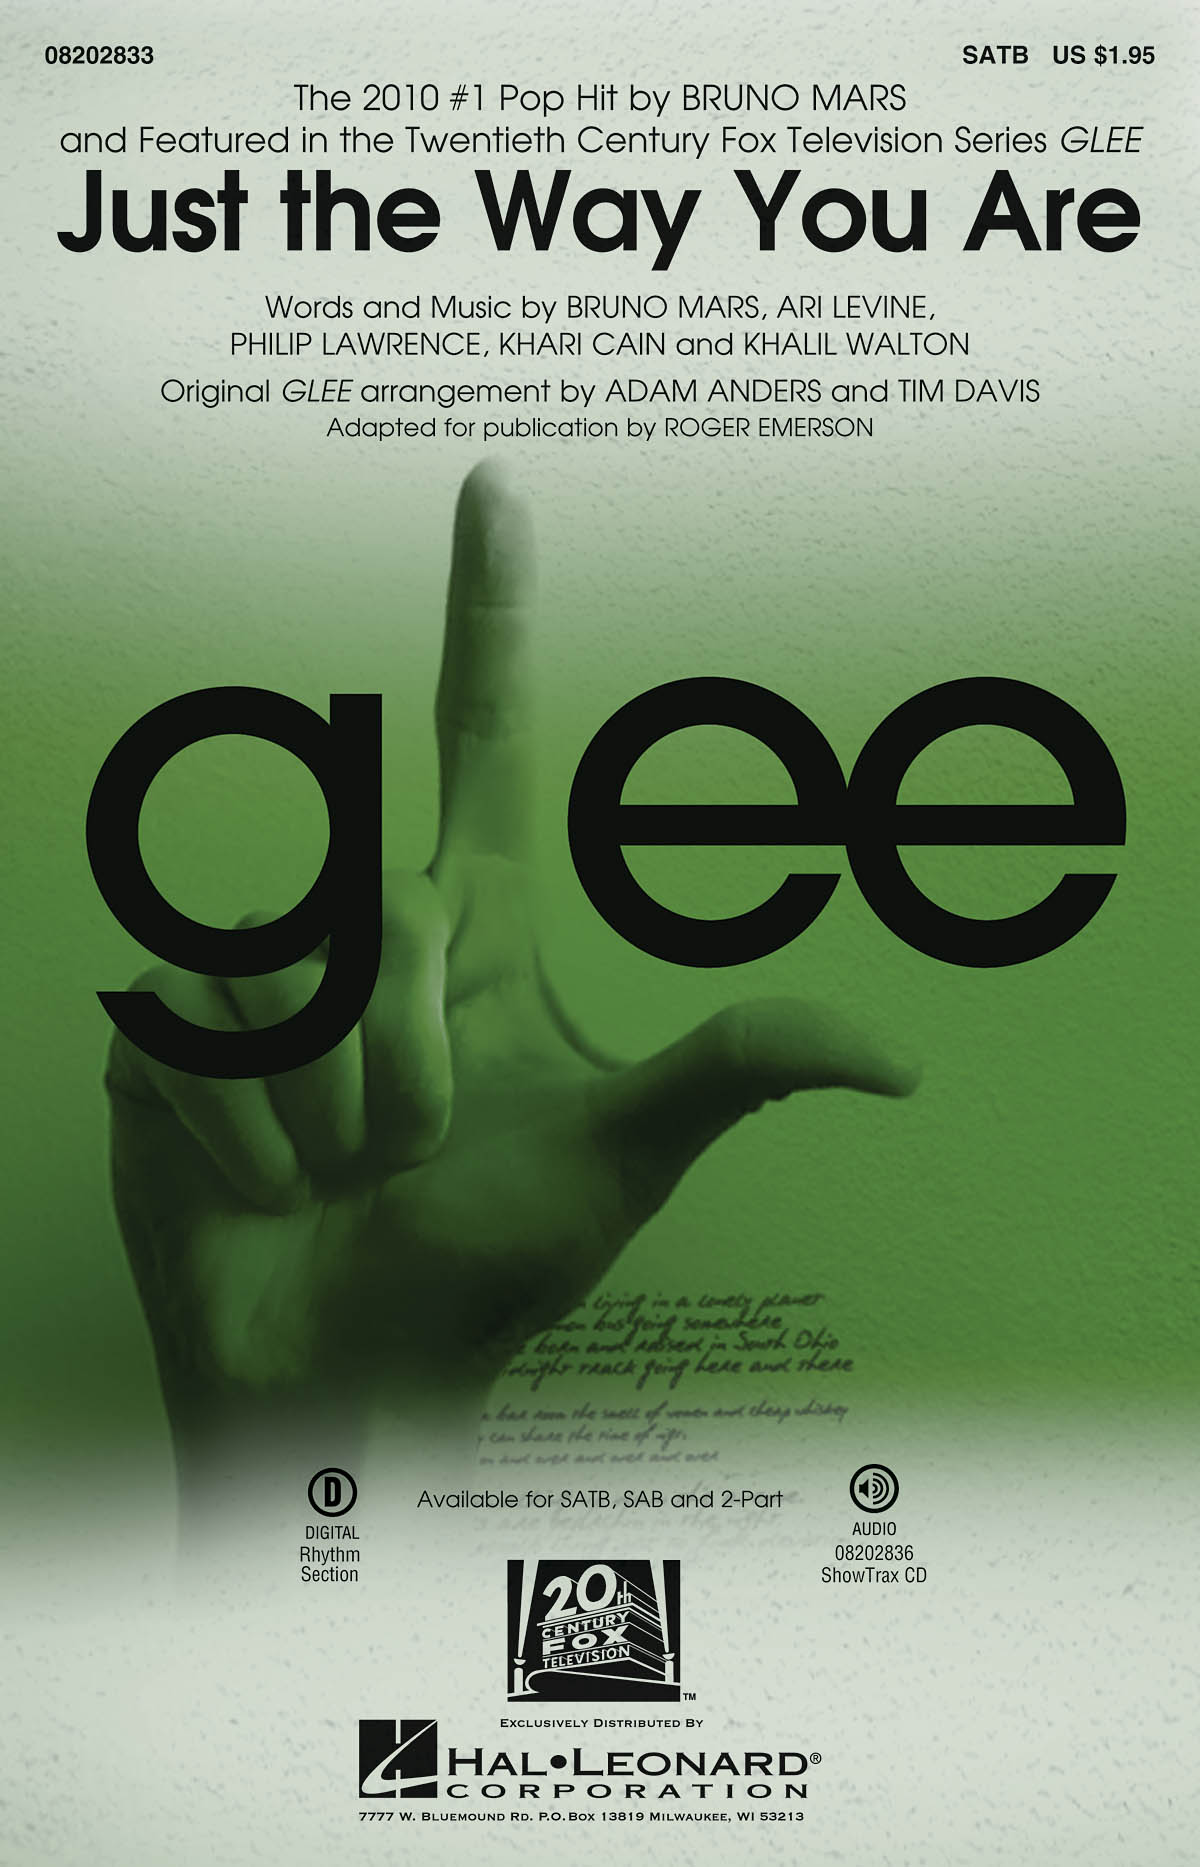 Just the Way You Are featured in Glee